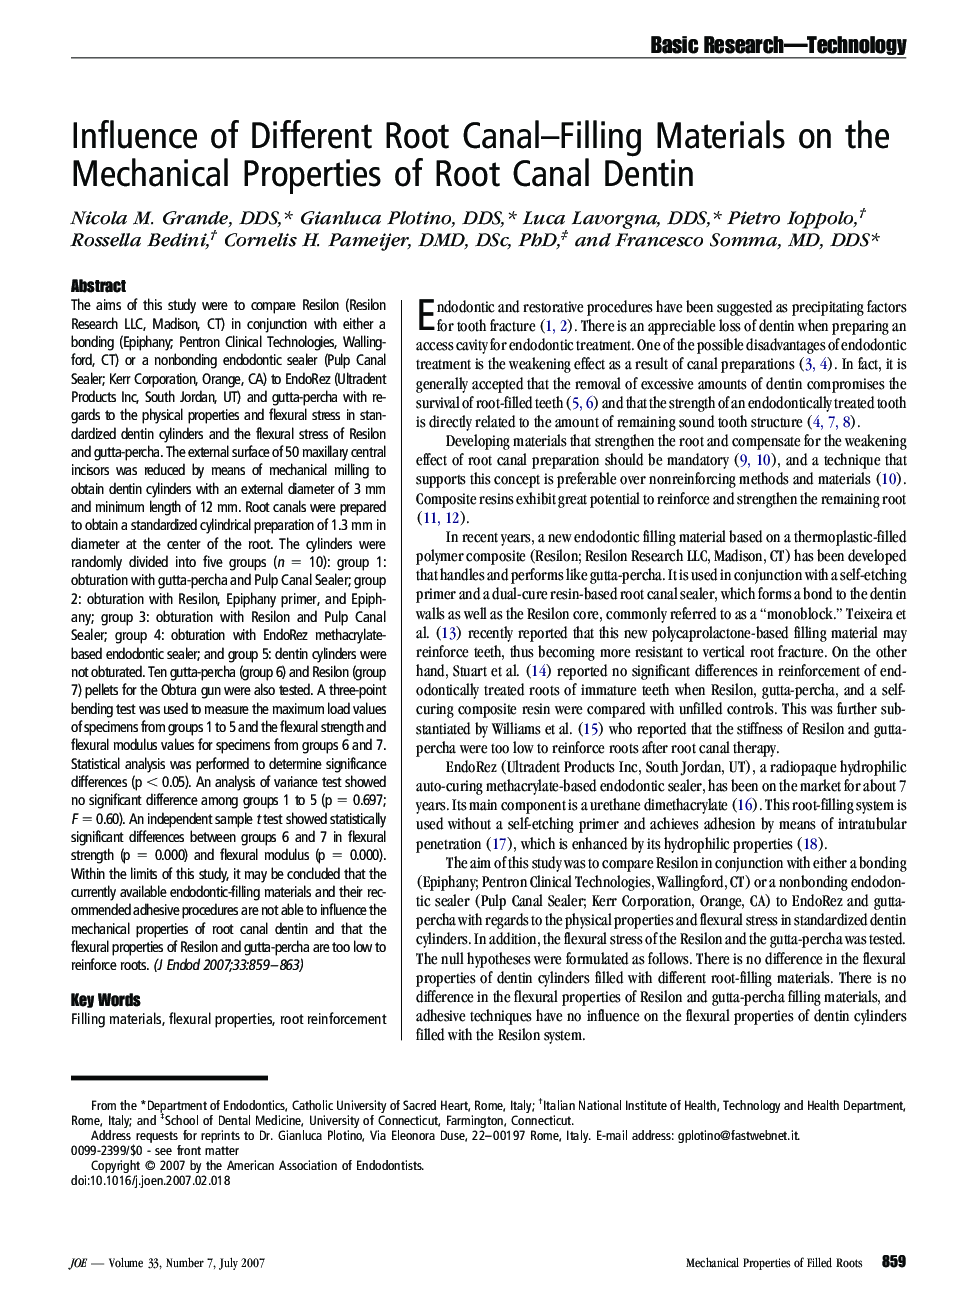 Influence of Different Root Canal-Filling Materials on the Mechanical Properties of Root Canal Dentin